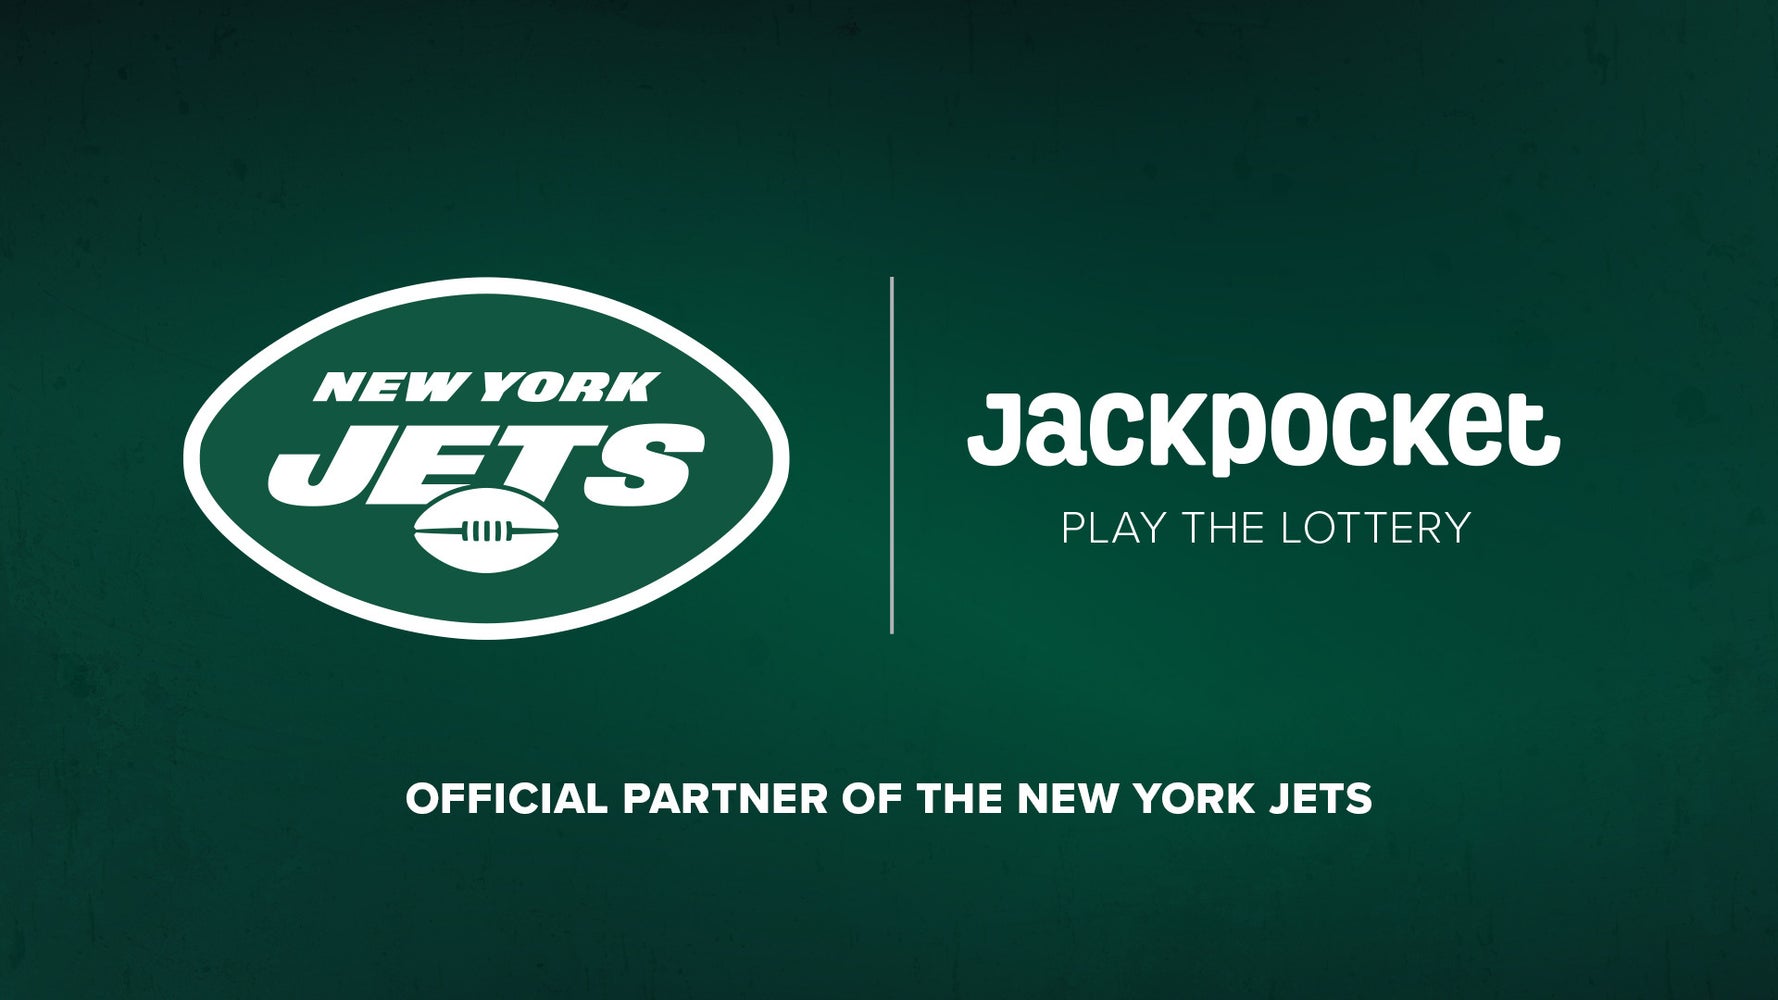 Jackpocket is an official partner of the New York Jets